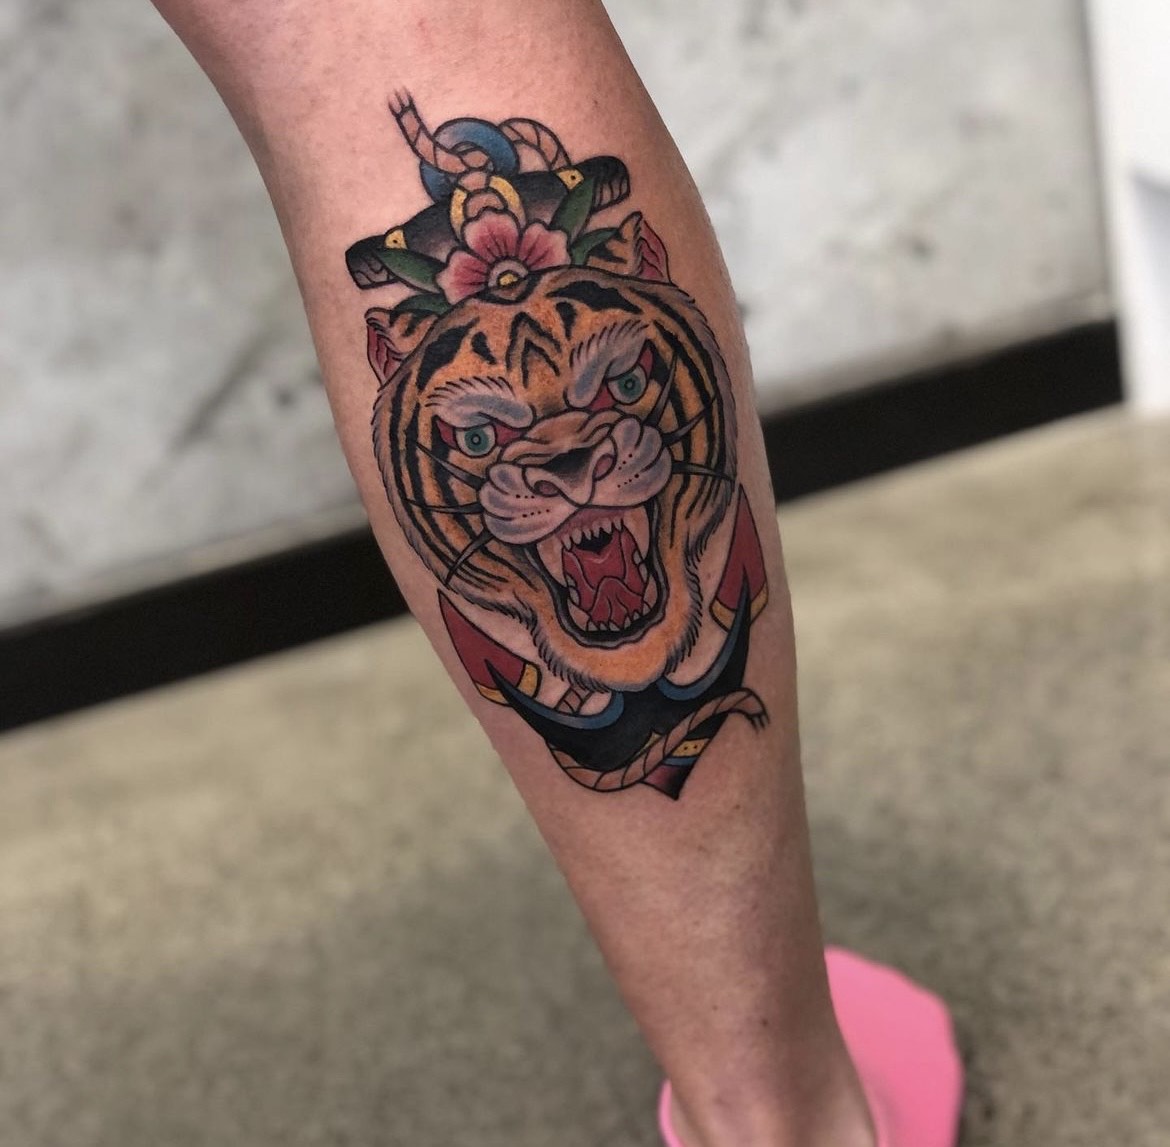 Neo trad Tiger for the homie jotheshow29 thanks for looking        For booking text DM or call the shop I am located  Instagram